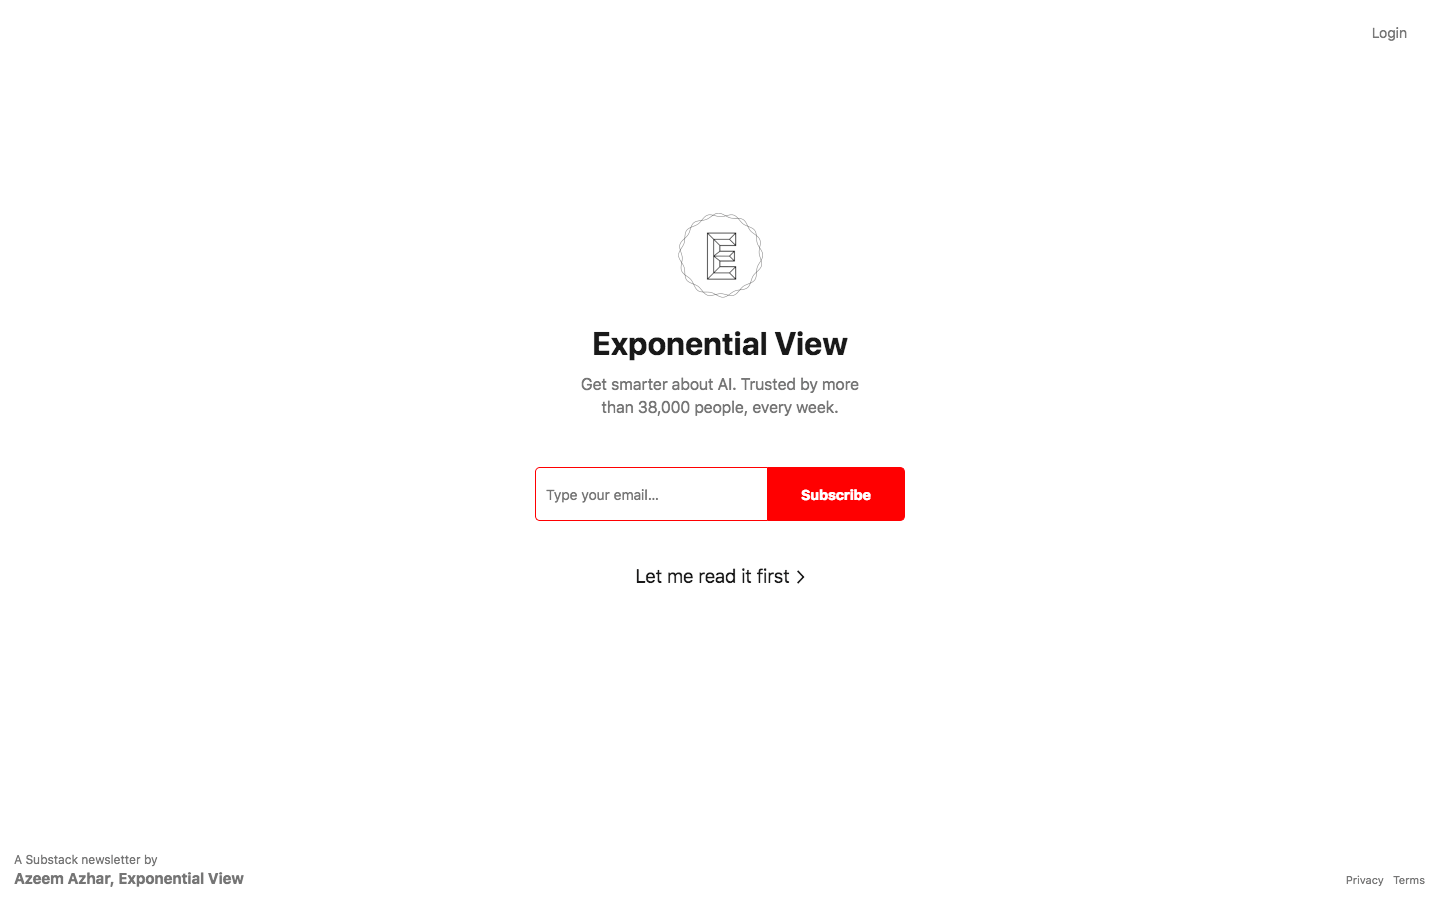 Exponential View homepage